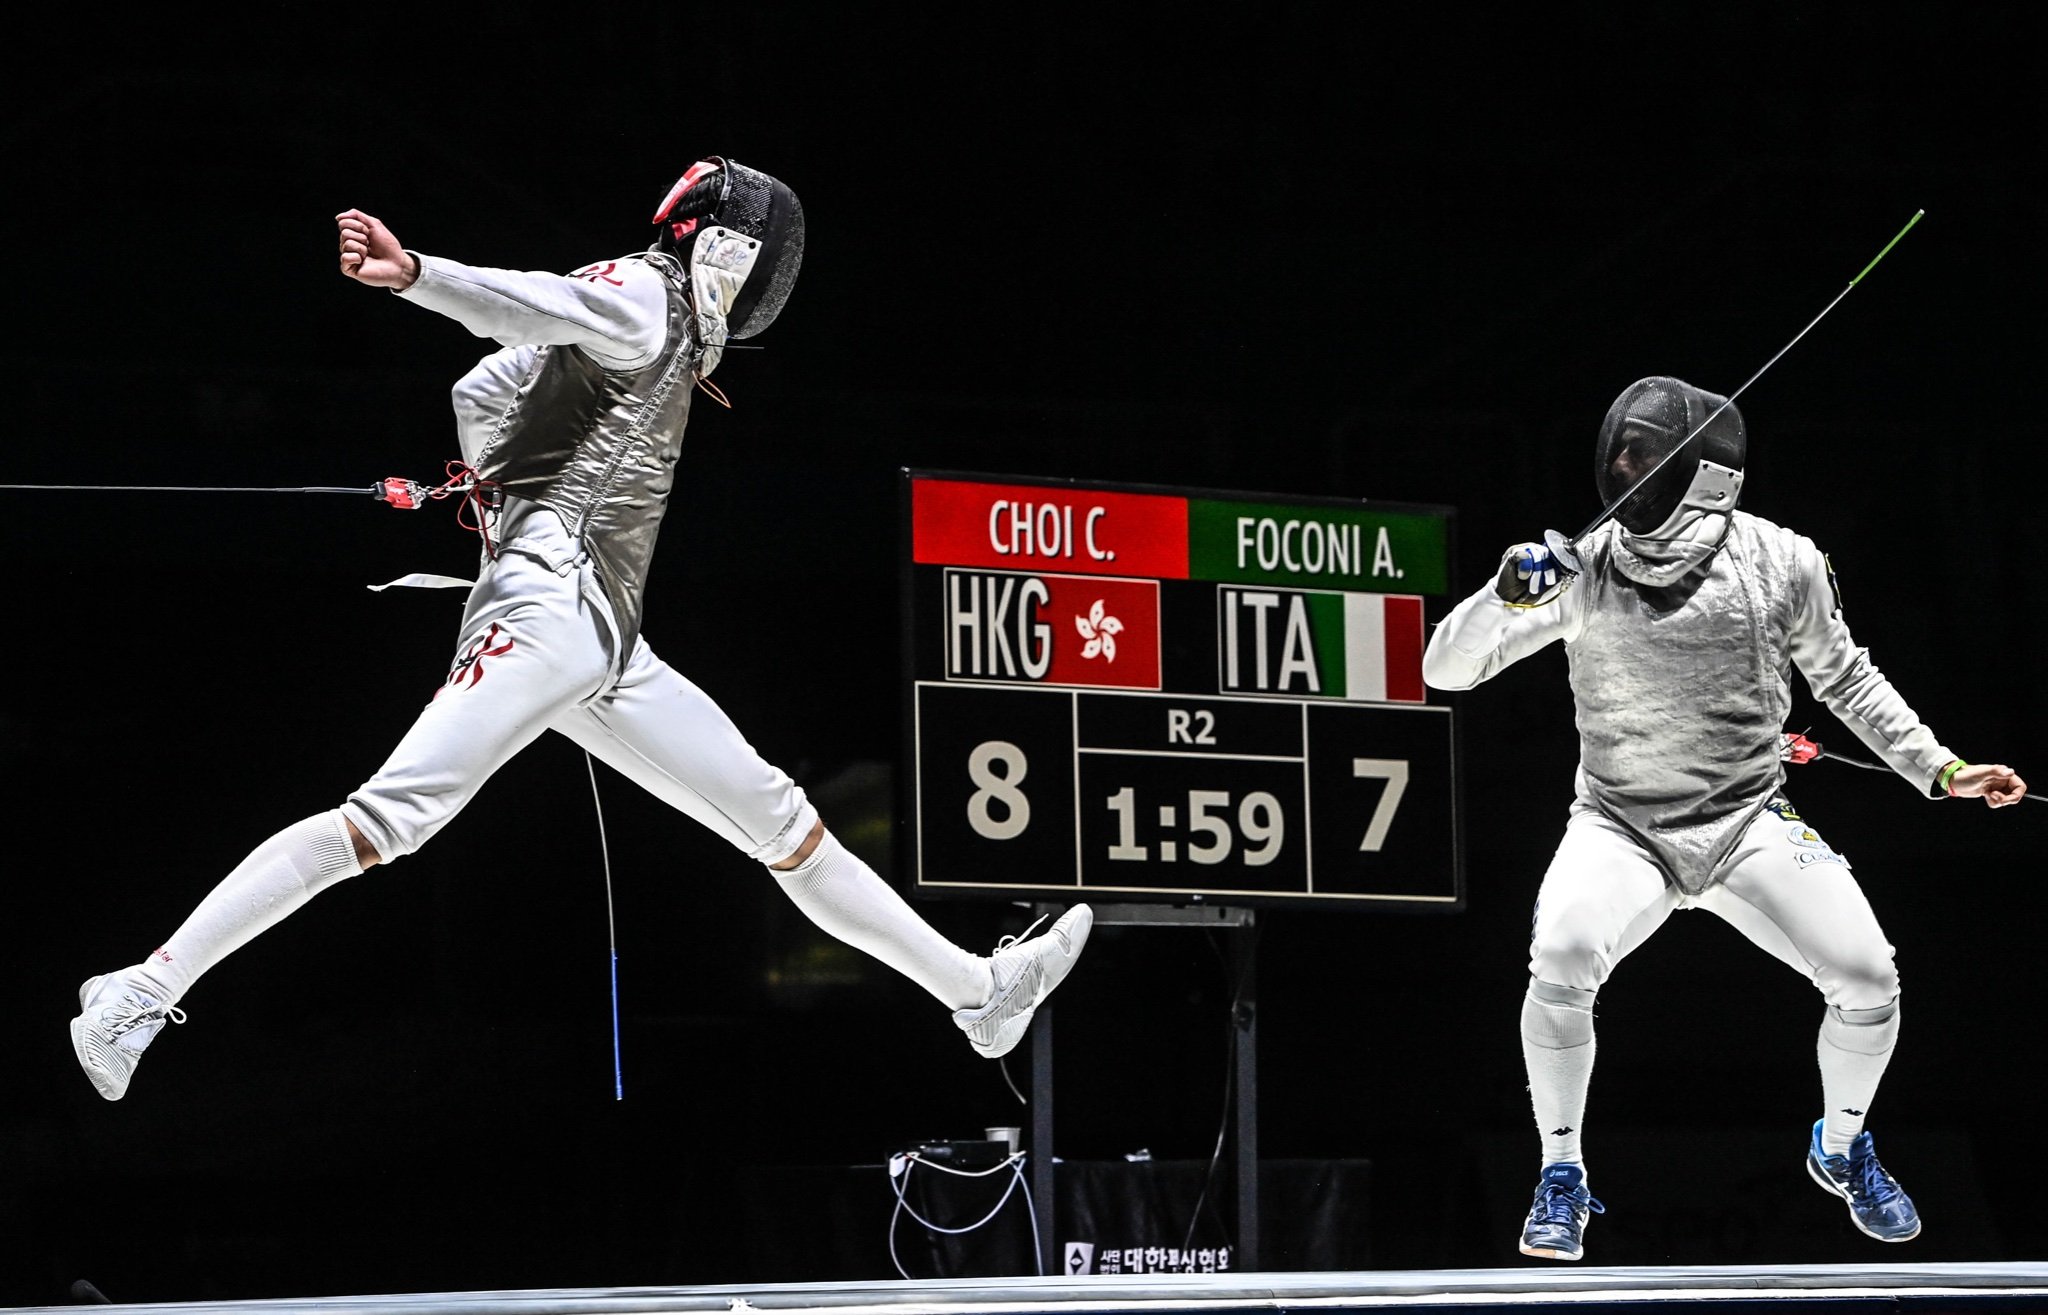 Ryan Choi (left) leaps during his semi-final against former world No 1 Alessio Foconi. Photo: FIE